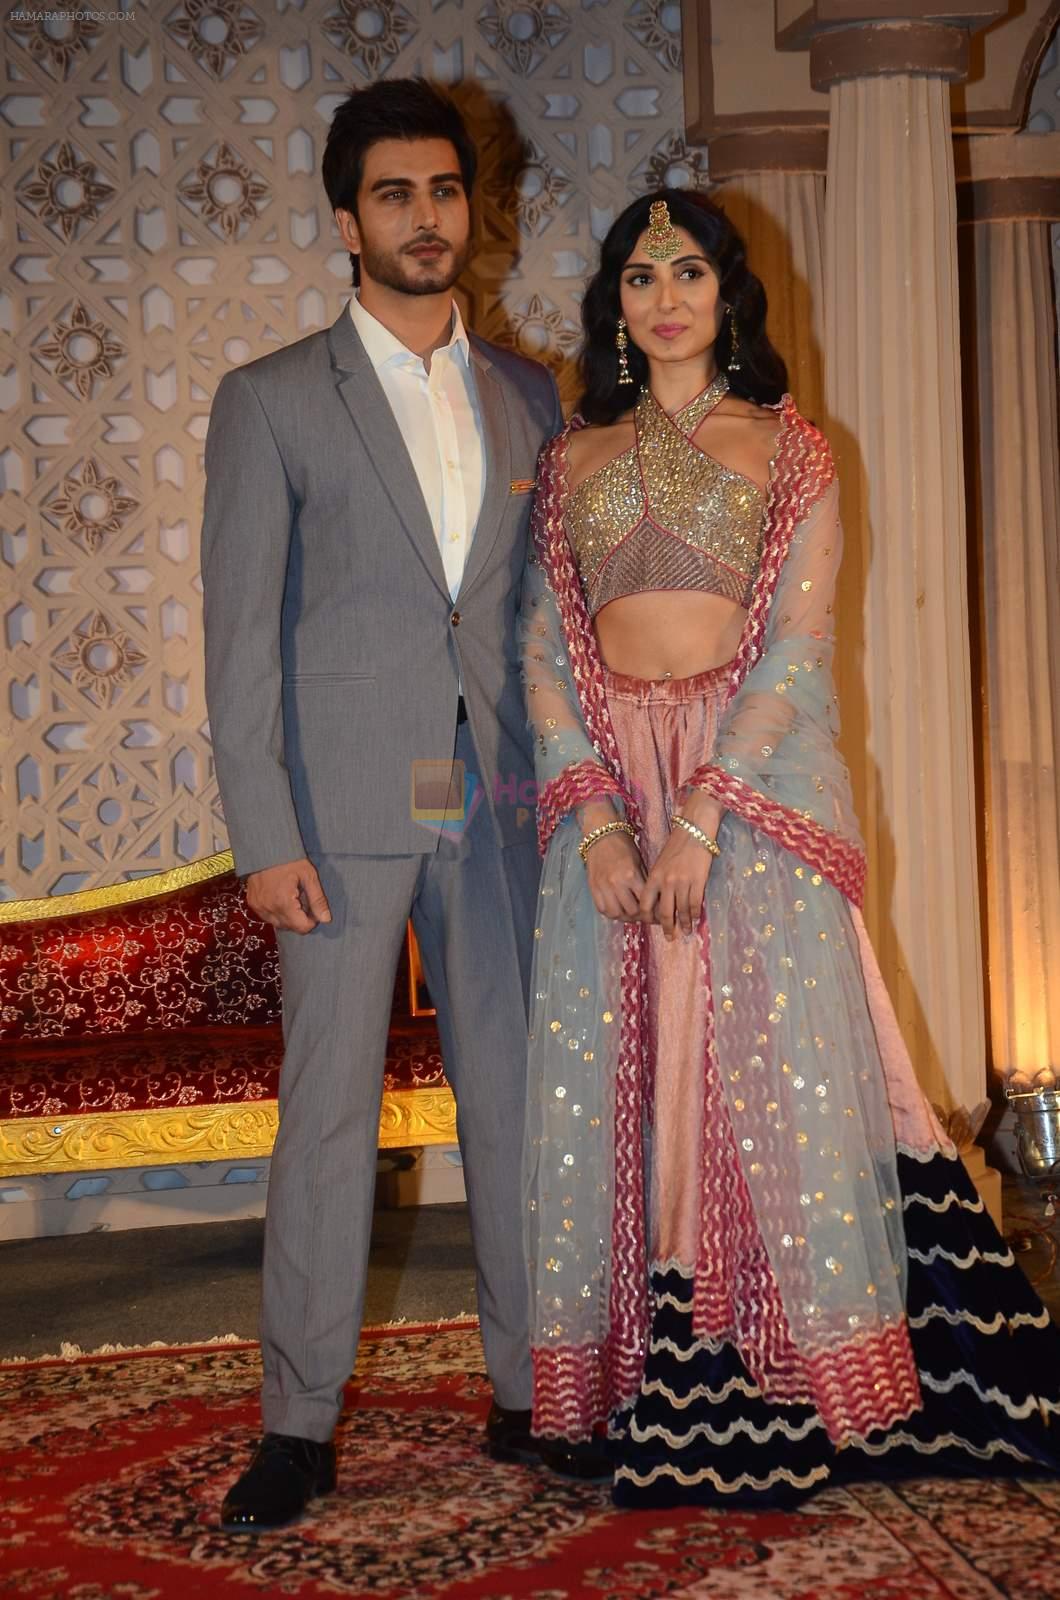 Imran Abbas, Pernia Qureshi at Jaanisaar music launch in Lalit Hotel on 23rd July 2015